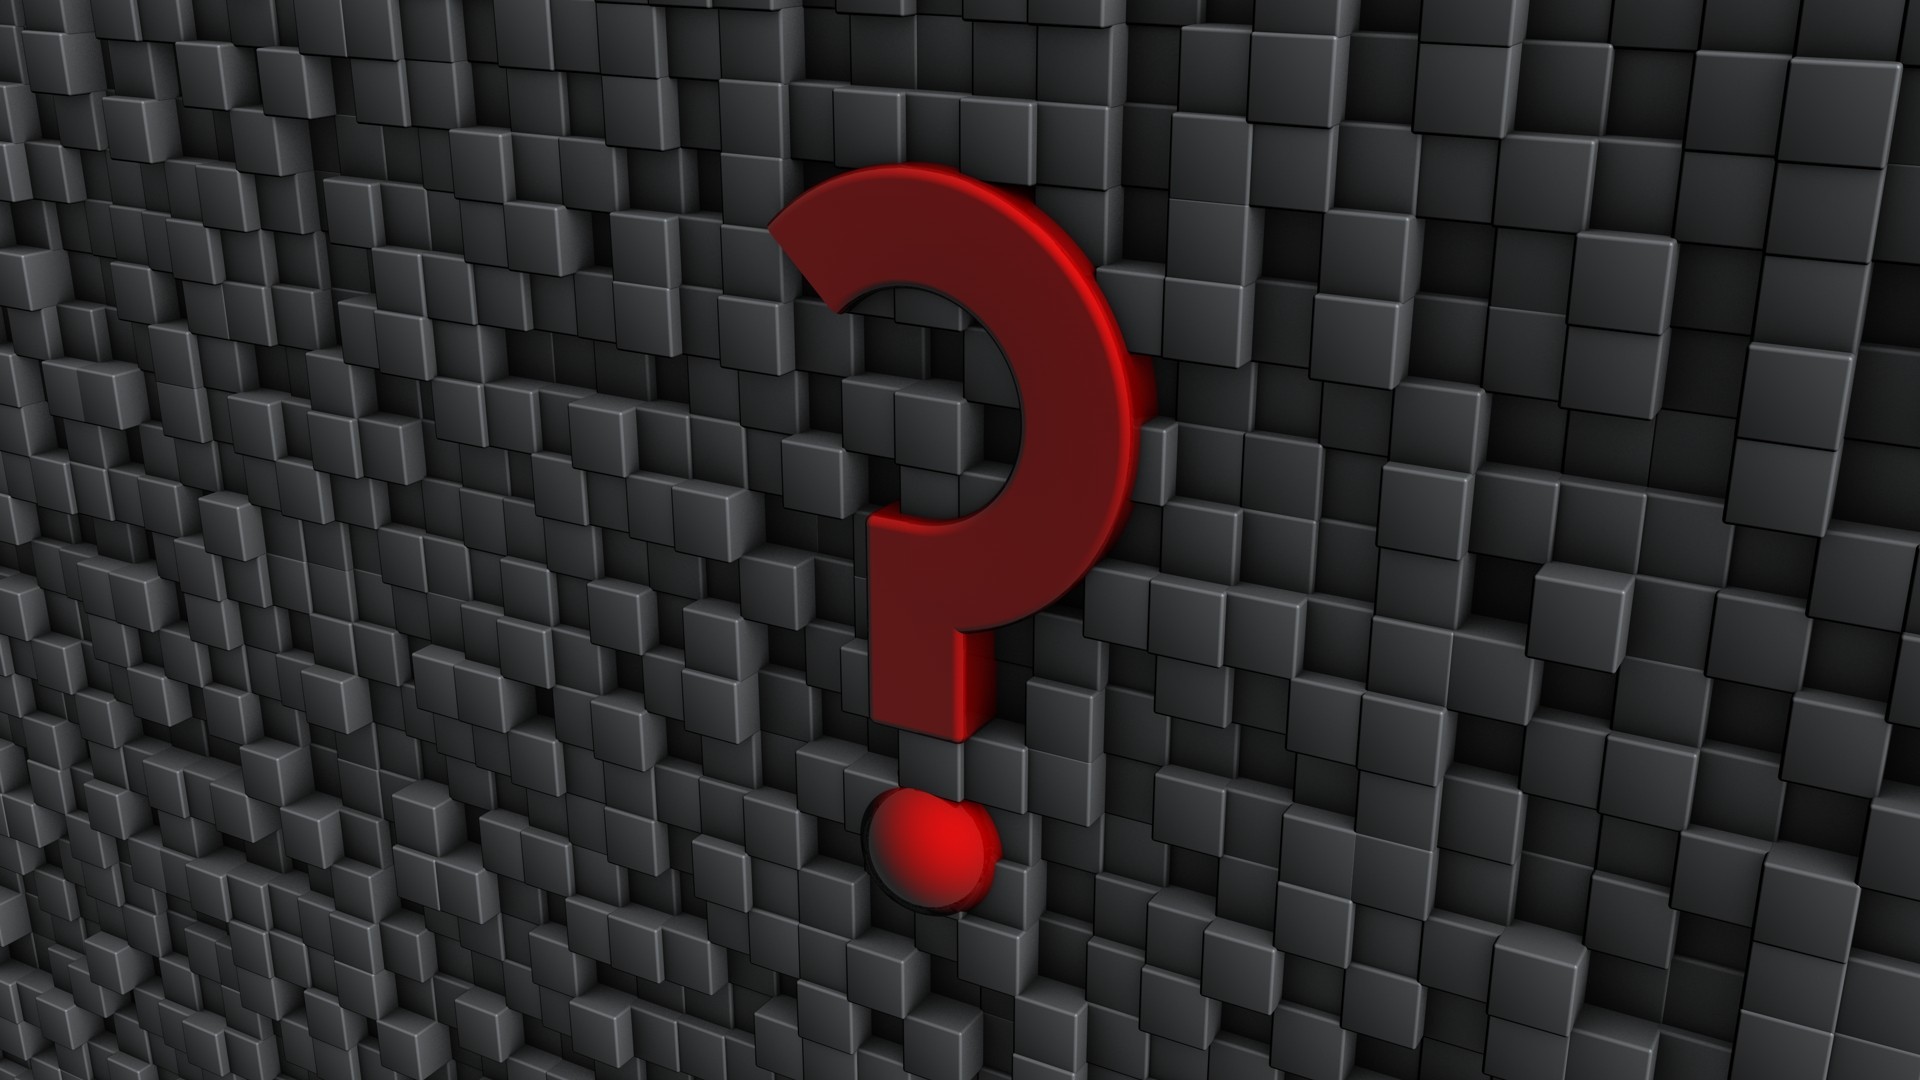 1920x1080 Abstract - Question Mark Question Wallpaper